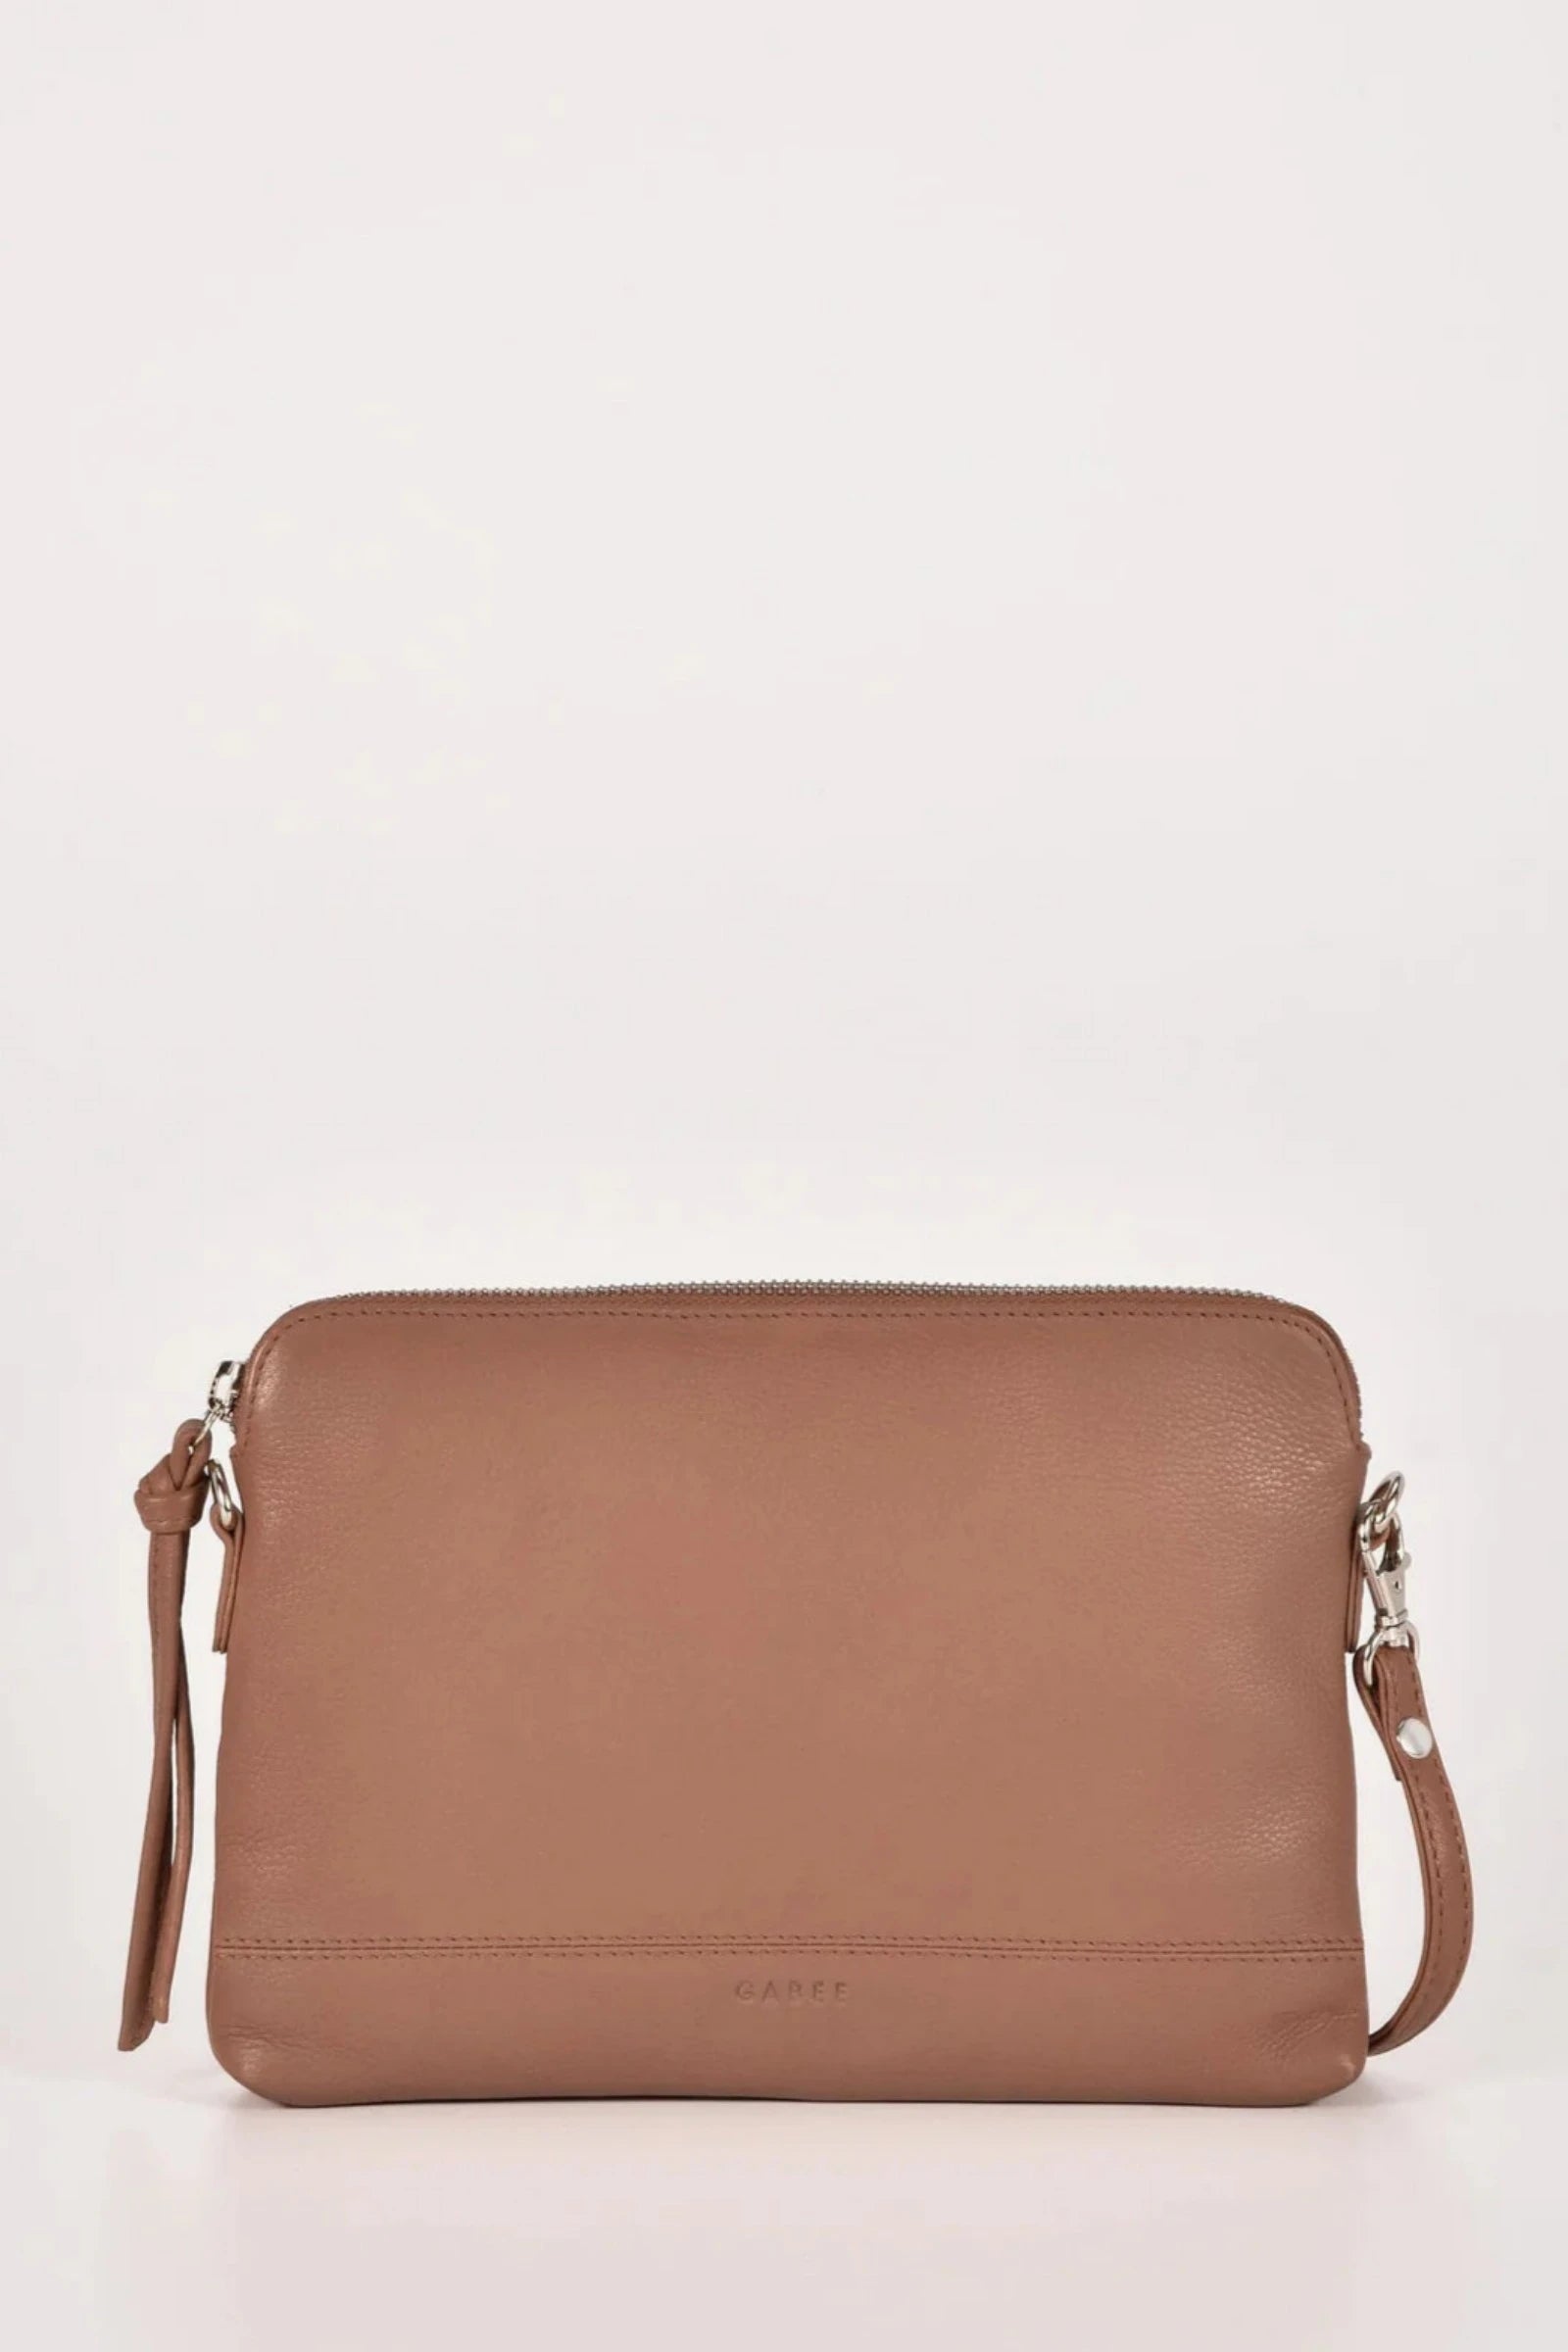 Gabee Holly Leather Crossbody Bag Taupe